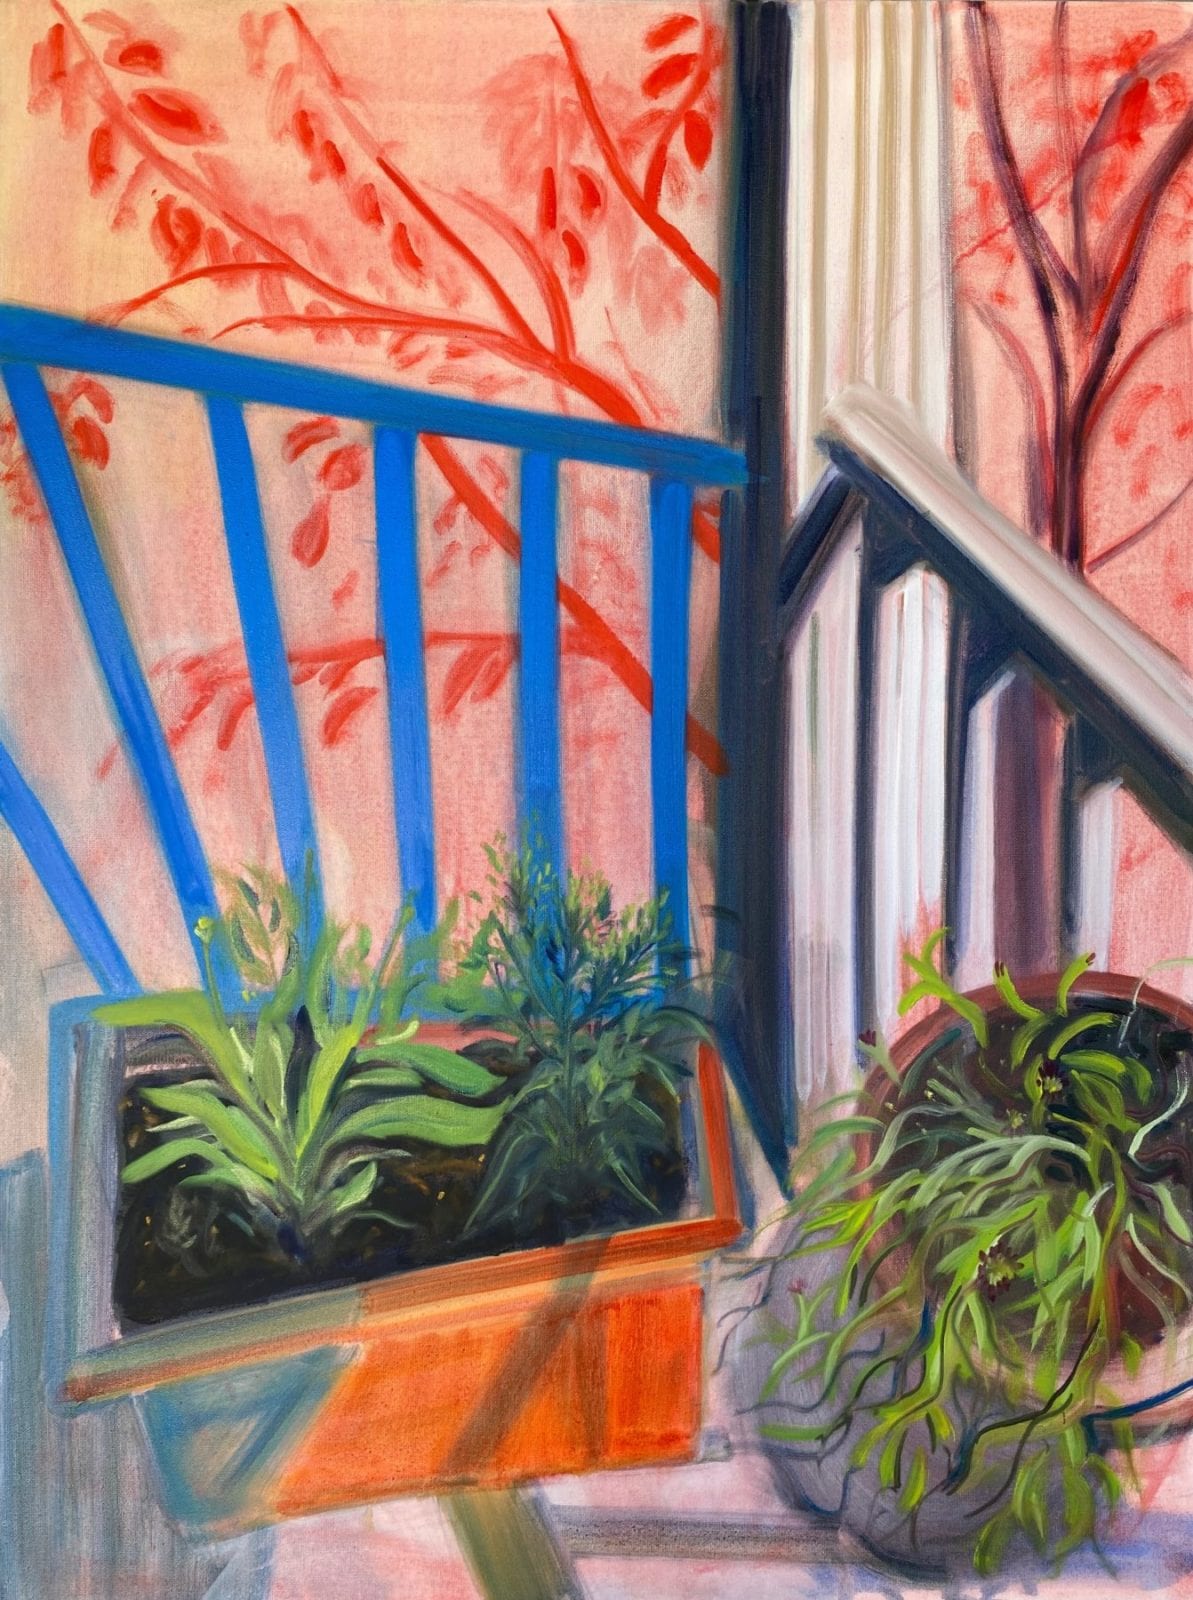 Ilana Visotsky, A Green Corner in my Patio, oil on canvas, 40 x 30 inches